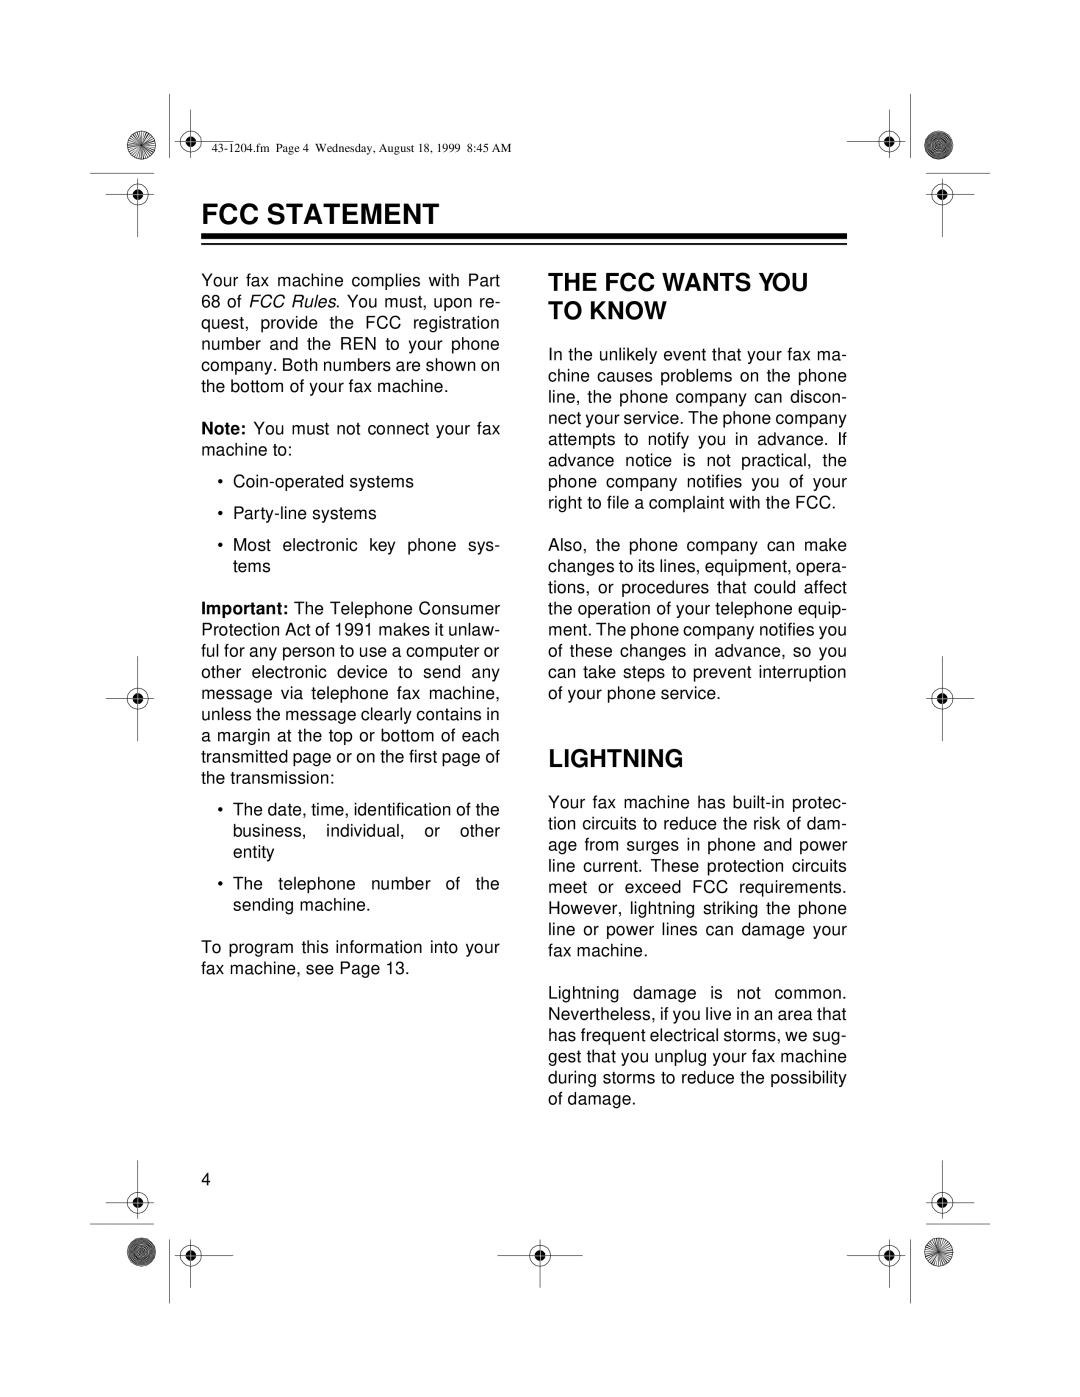 Radio Shack 43-1204 owner manual Fcc Statement, The Fcc Wants You To Know, Lightning 